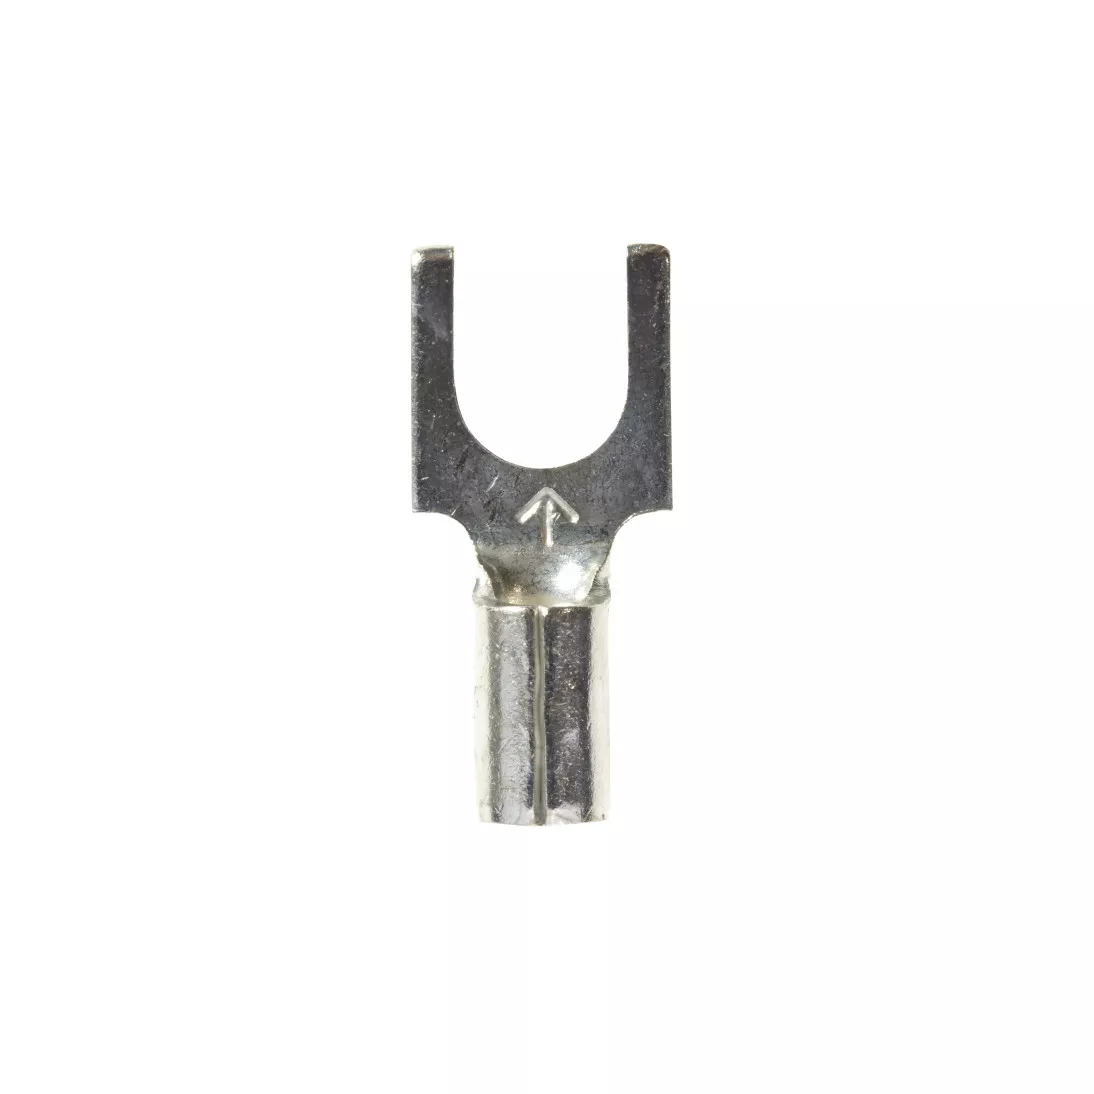 3M™ Scotchlok™ Block Fork, Non-Insulated Butted Seam MU14-10FBK, Stud
Size 10, suitable for use in a terminal block, 1000/Case